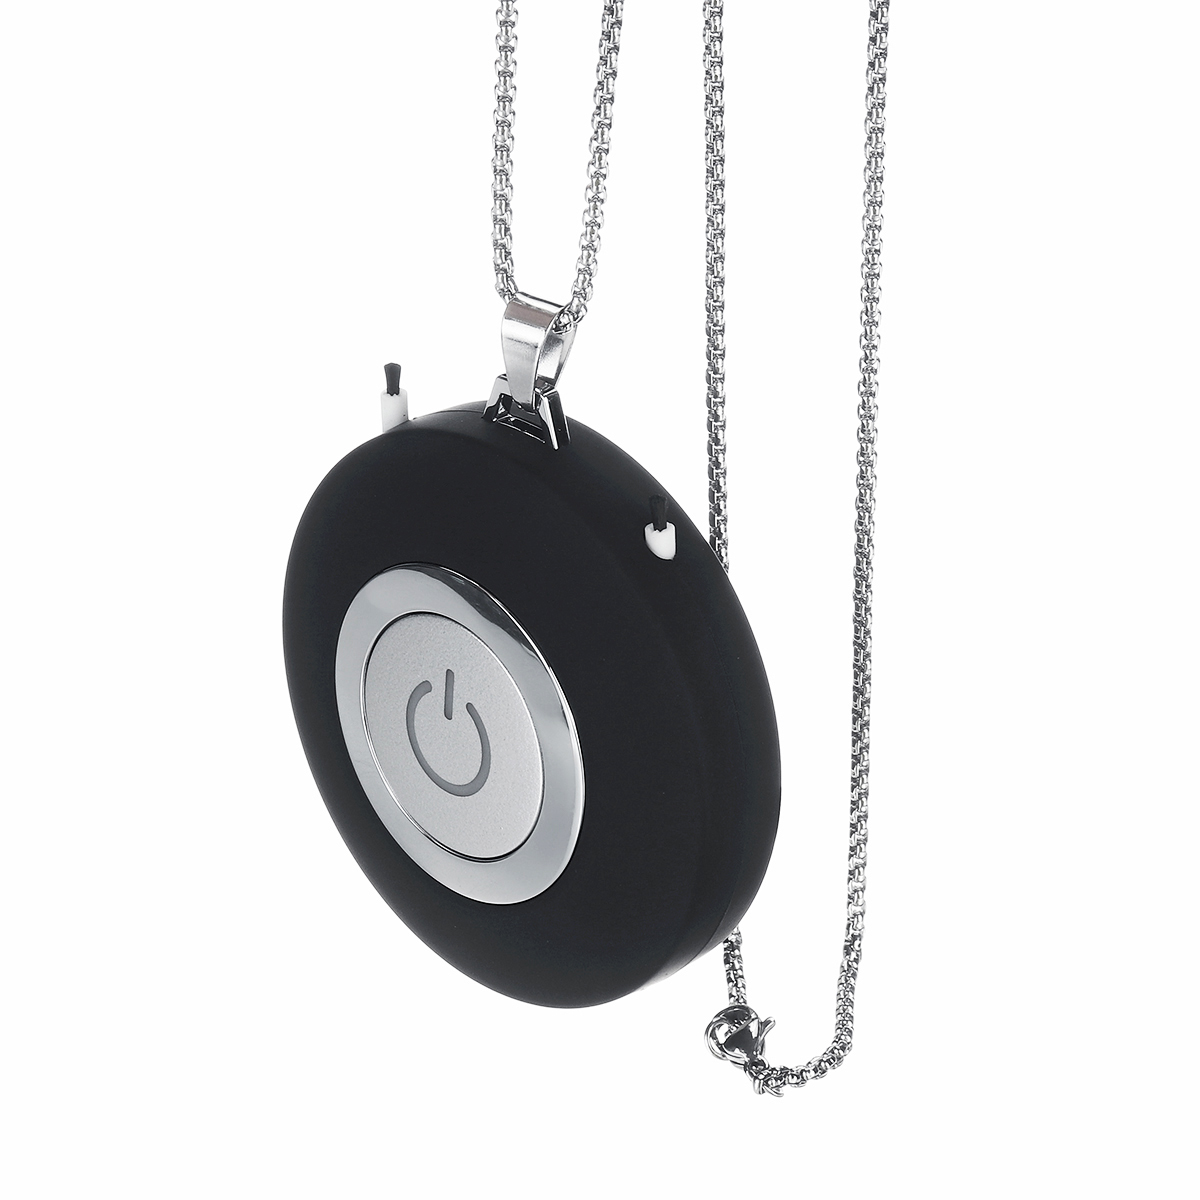 Wearable-Air-Purifier-Necklace-Mini-Portable-USB-Negative-Ion-Air-Cleaner-Freshener-1670191-8